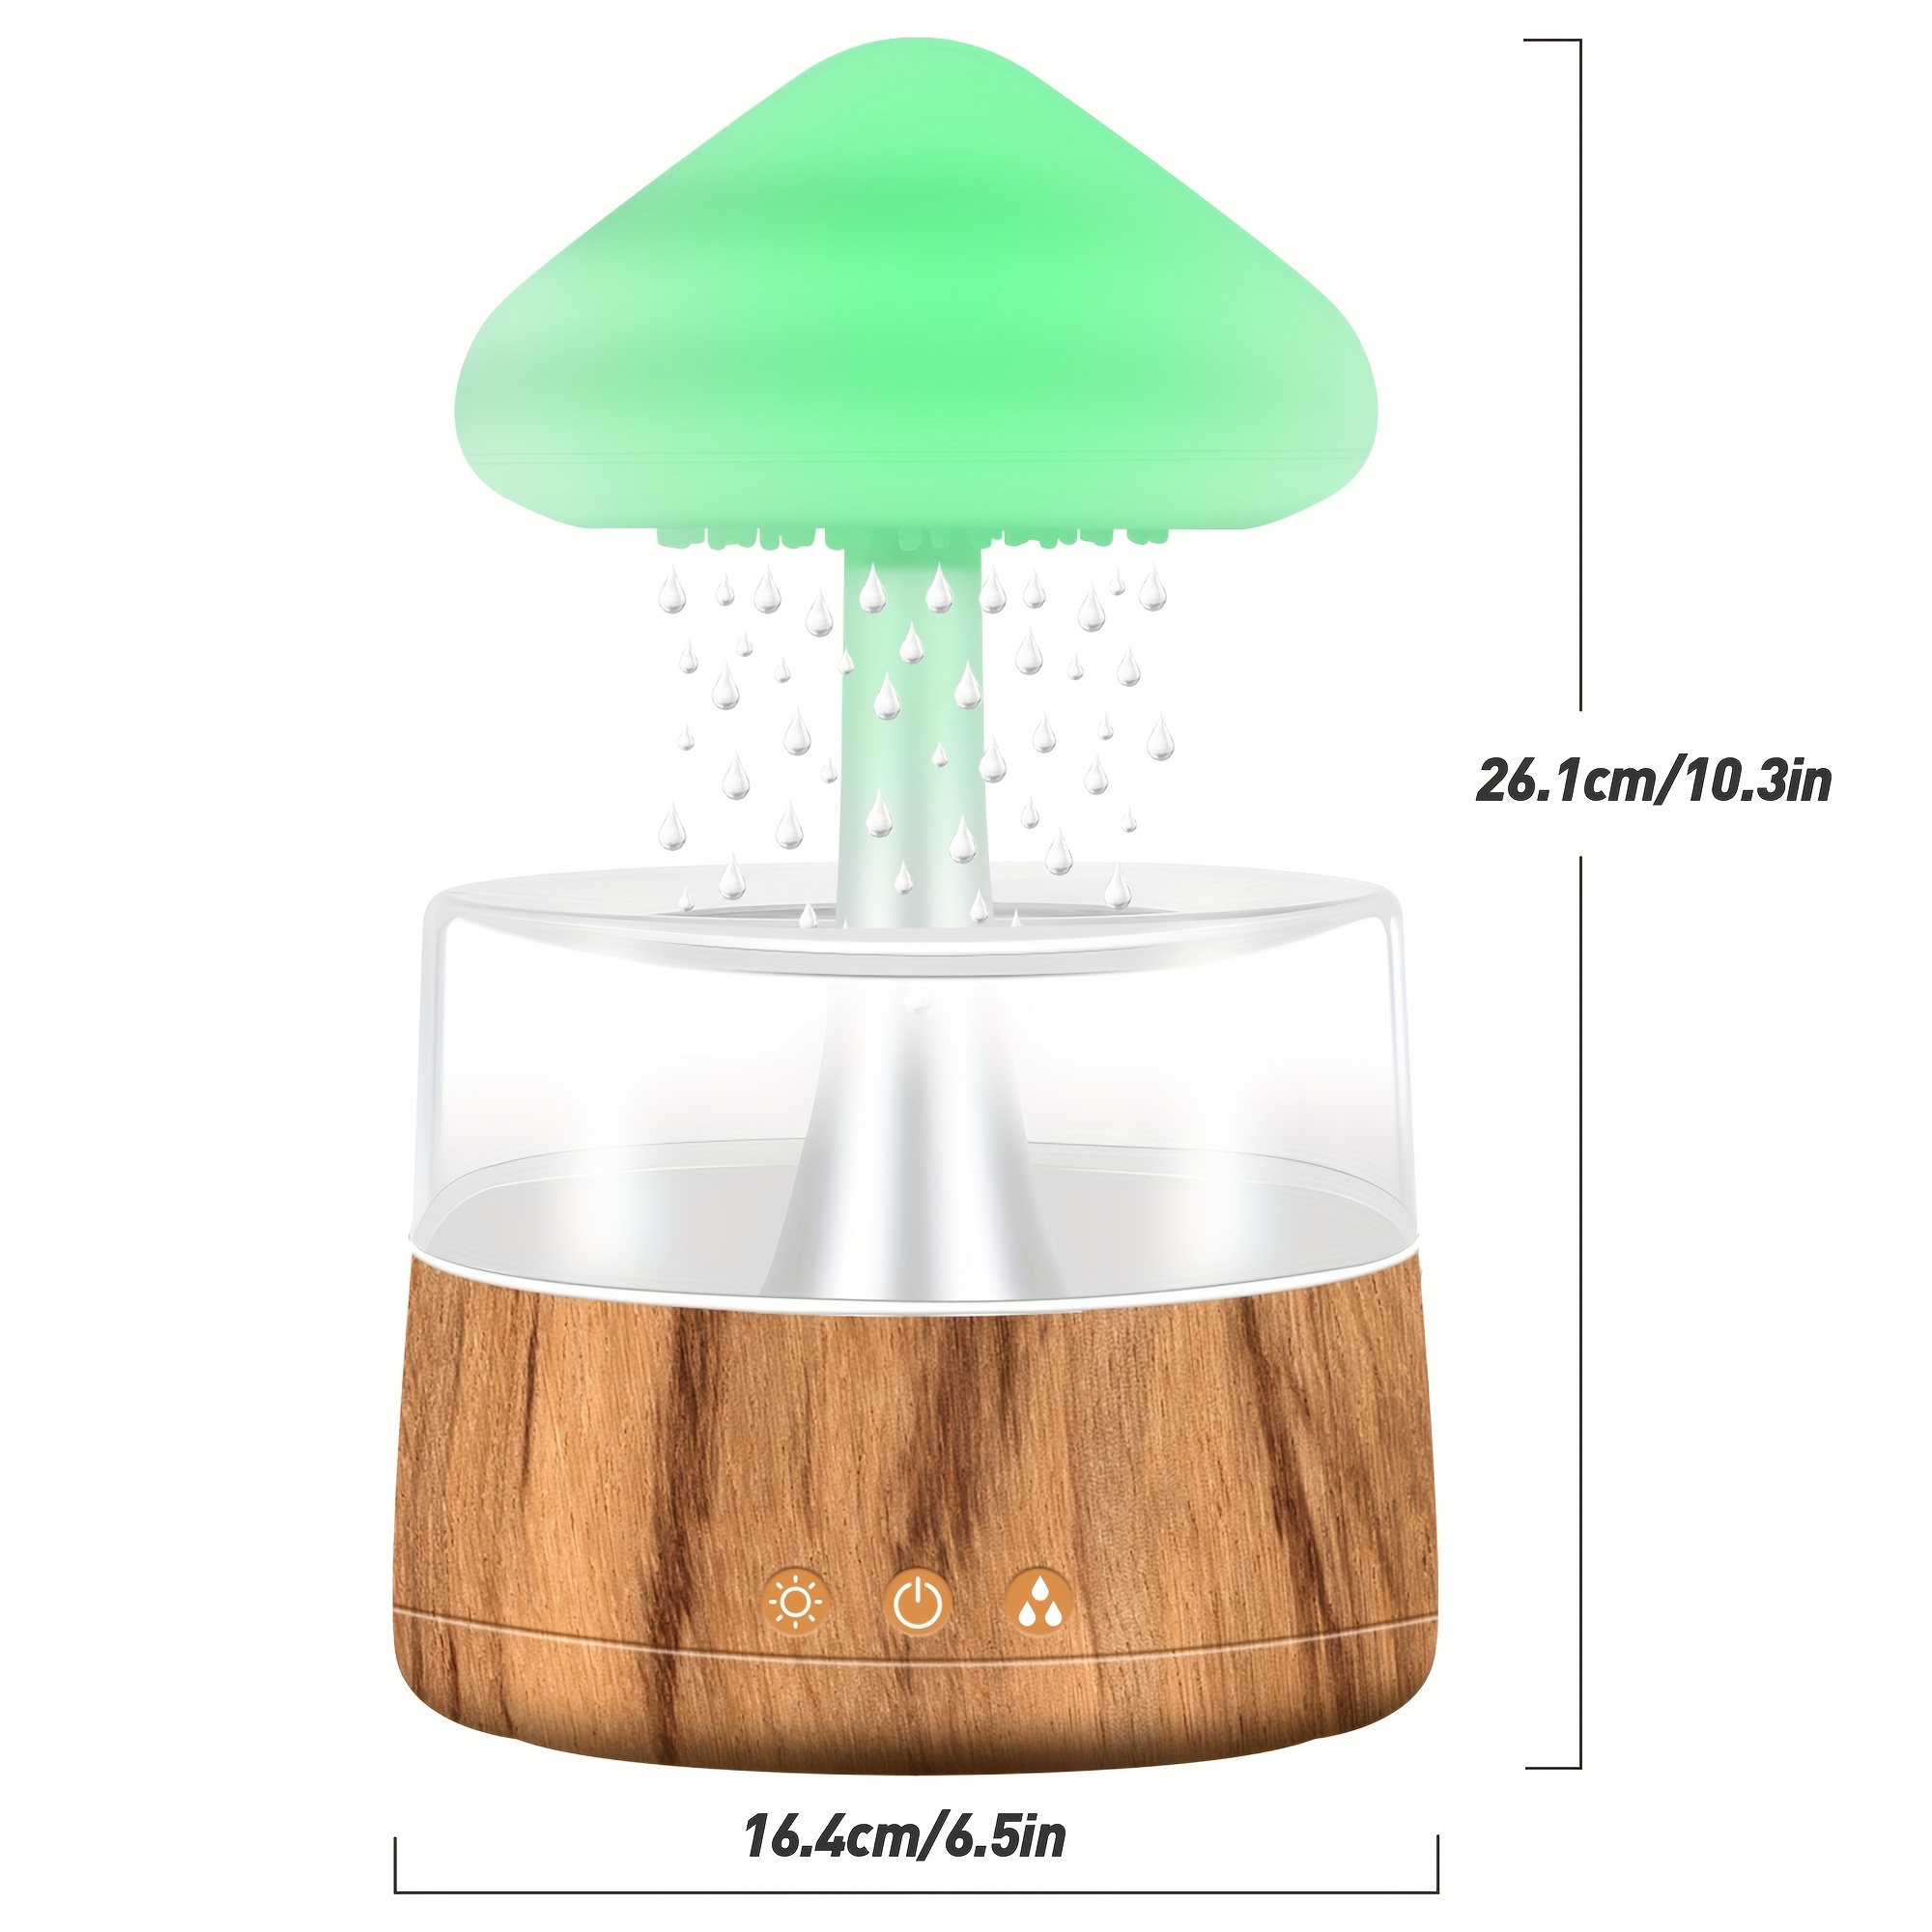 1pc rain cloud humidifier water drip with 5 essential oils cloud diffuser with rain 7 changing colors desk fountain bedside for sleeping relaxing mood water drop sound details 2